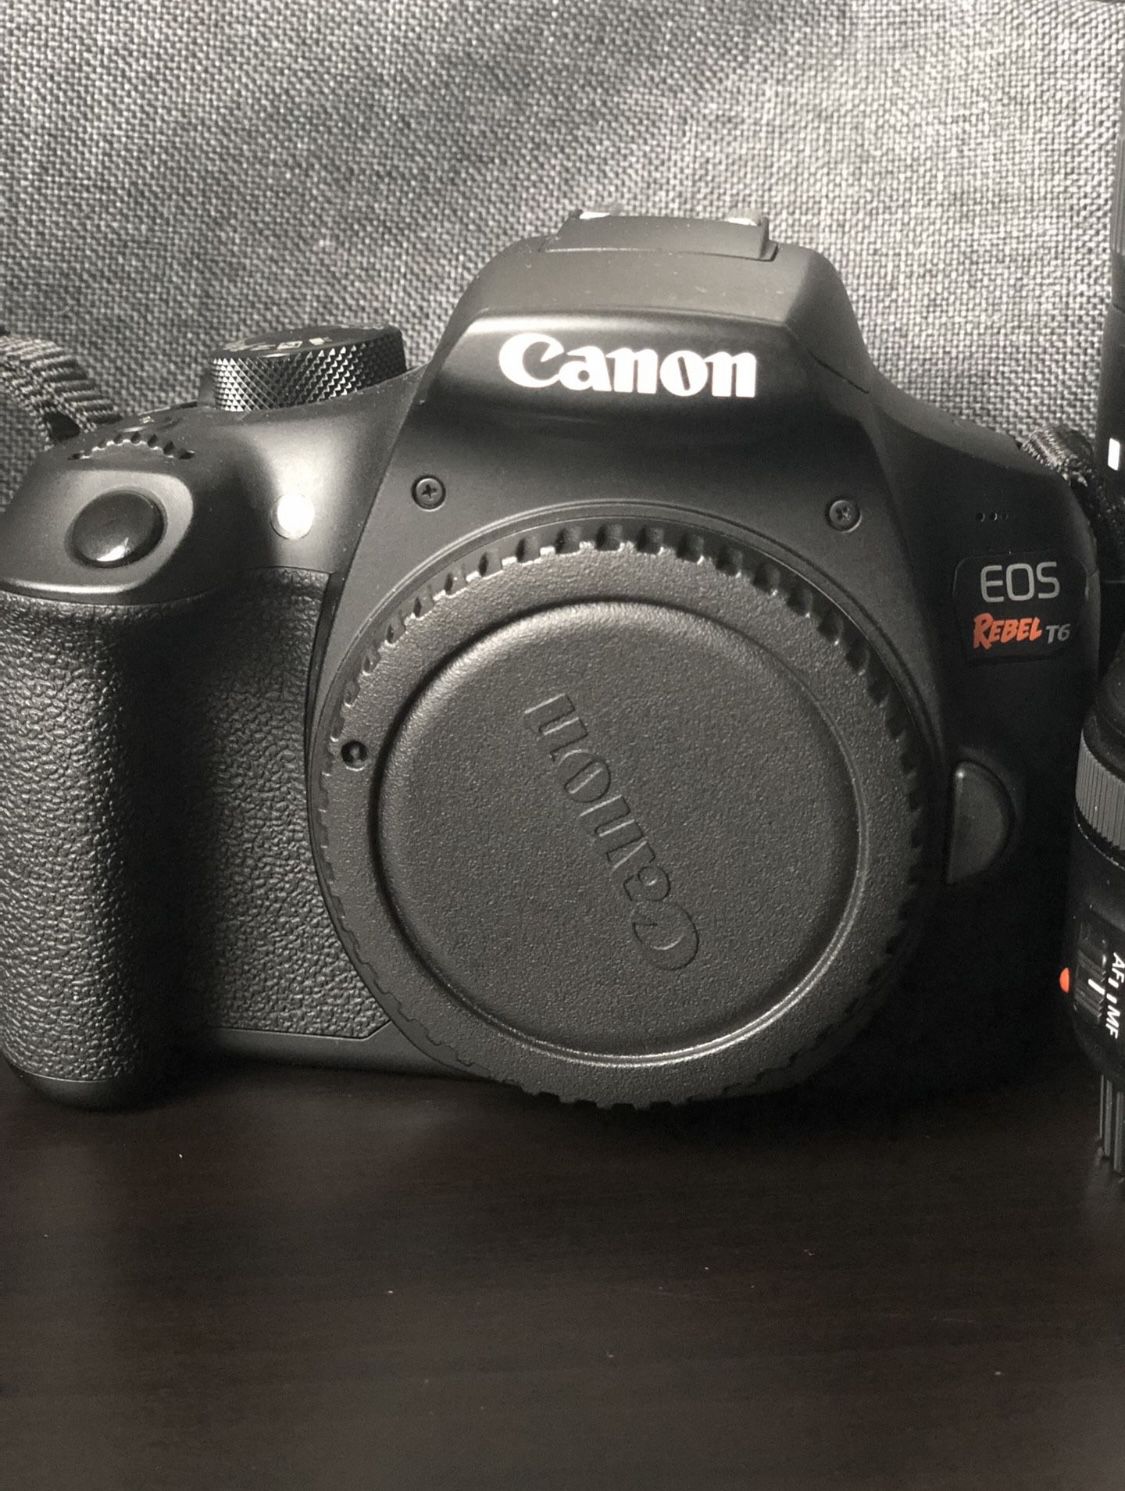 Canon rebel T6 with with 18-55mm EFs lens